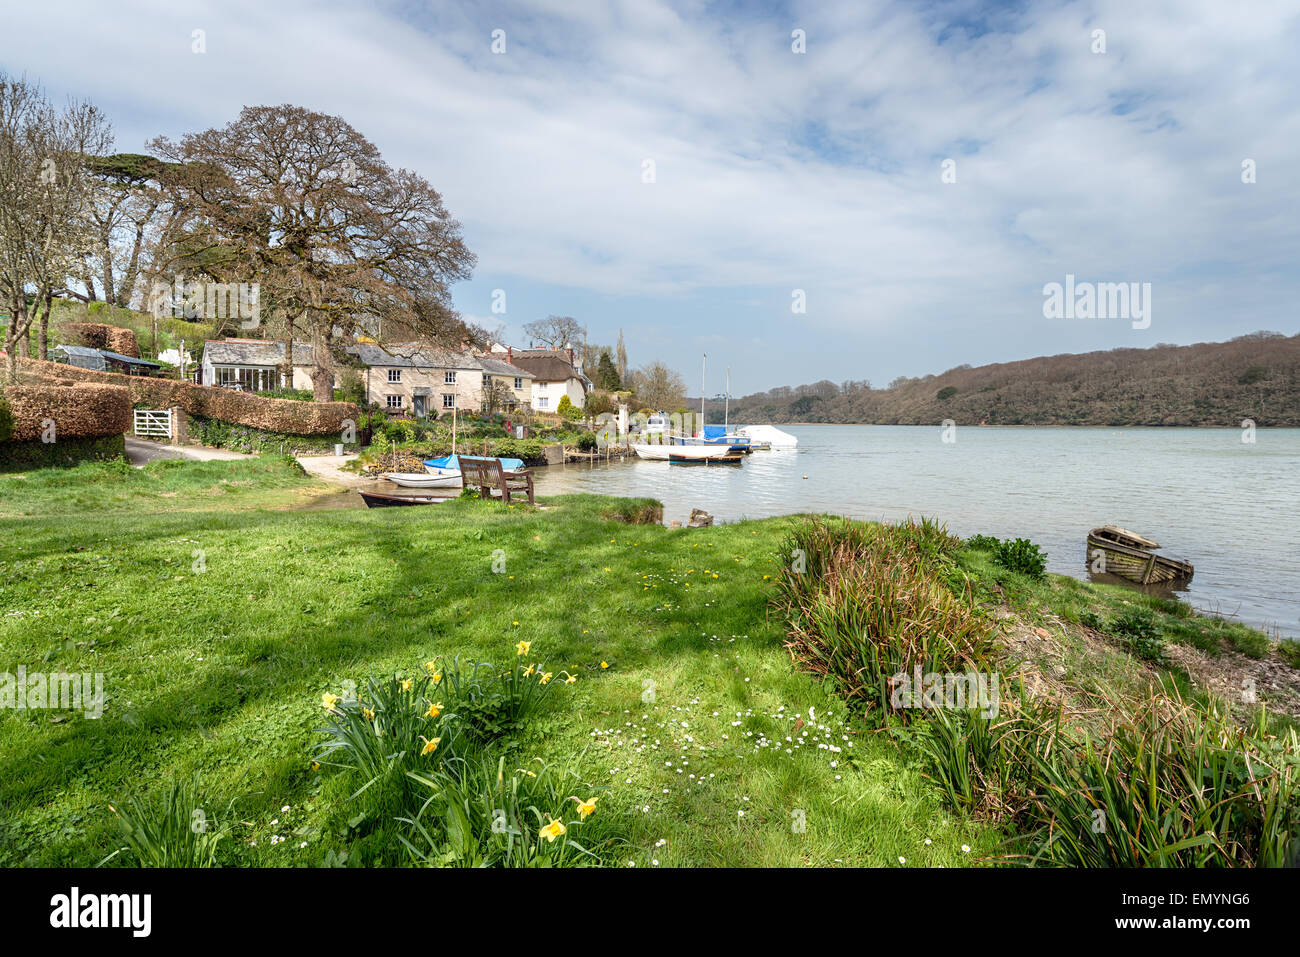 St Clement, a small picturesque hamlet on the banks of the Tresillian River just outside of Truro Stock Photo